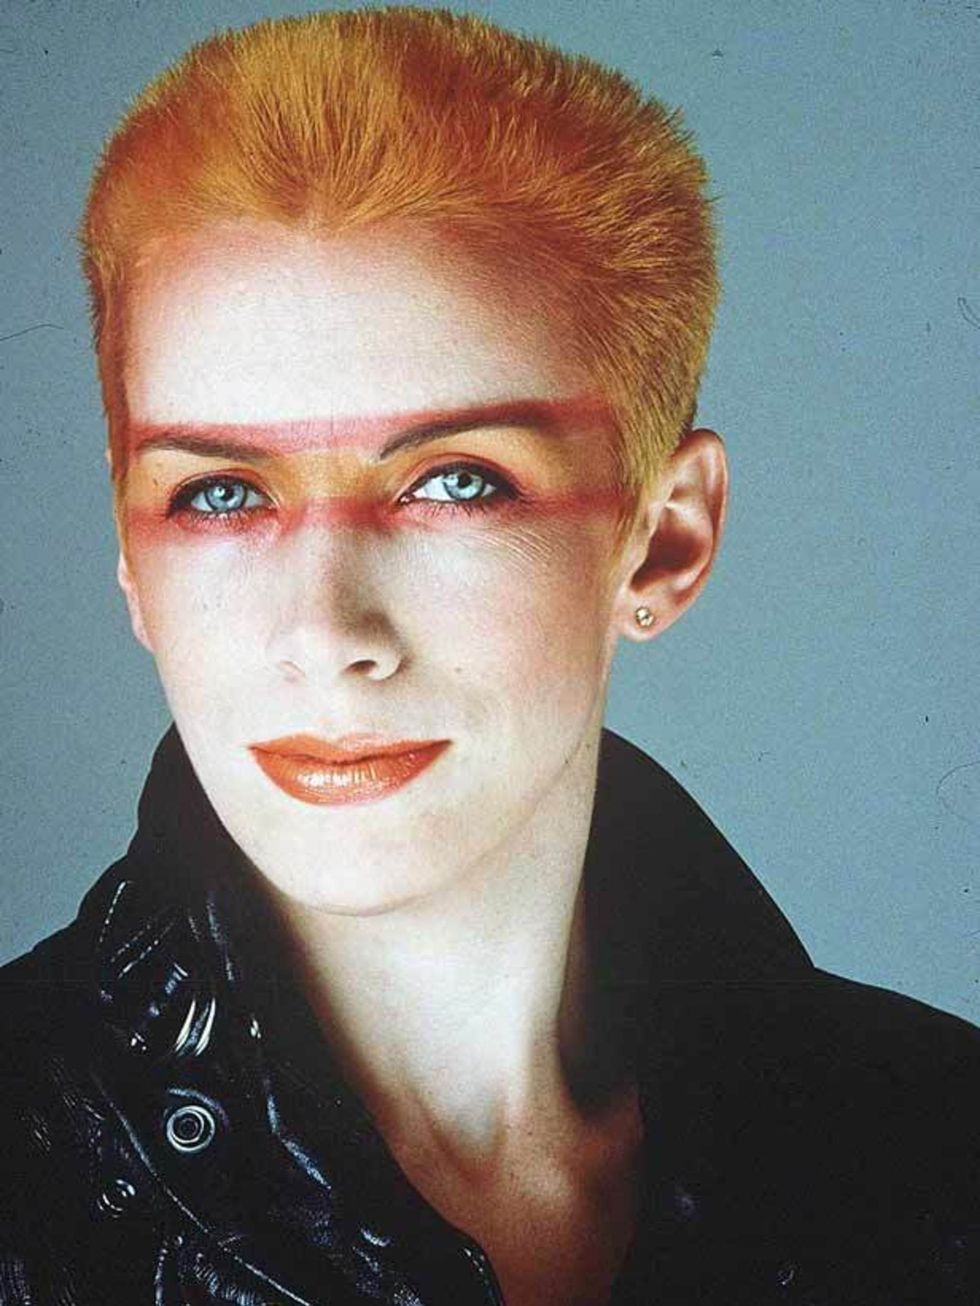 <p><a href="http://www.elleuk.com/content/search?SearchText=Annie+Lennox&amp;SearchButton=Search">Annie Lennox</a> strikes a pose in a biker jacket &amp; glam rock make-up in 1985</p>